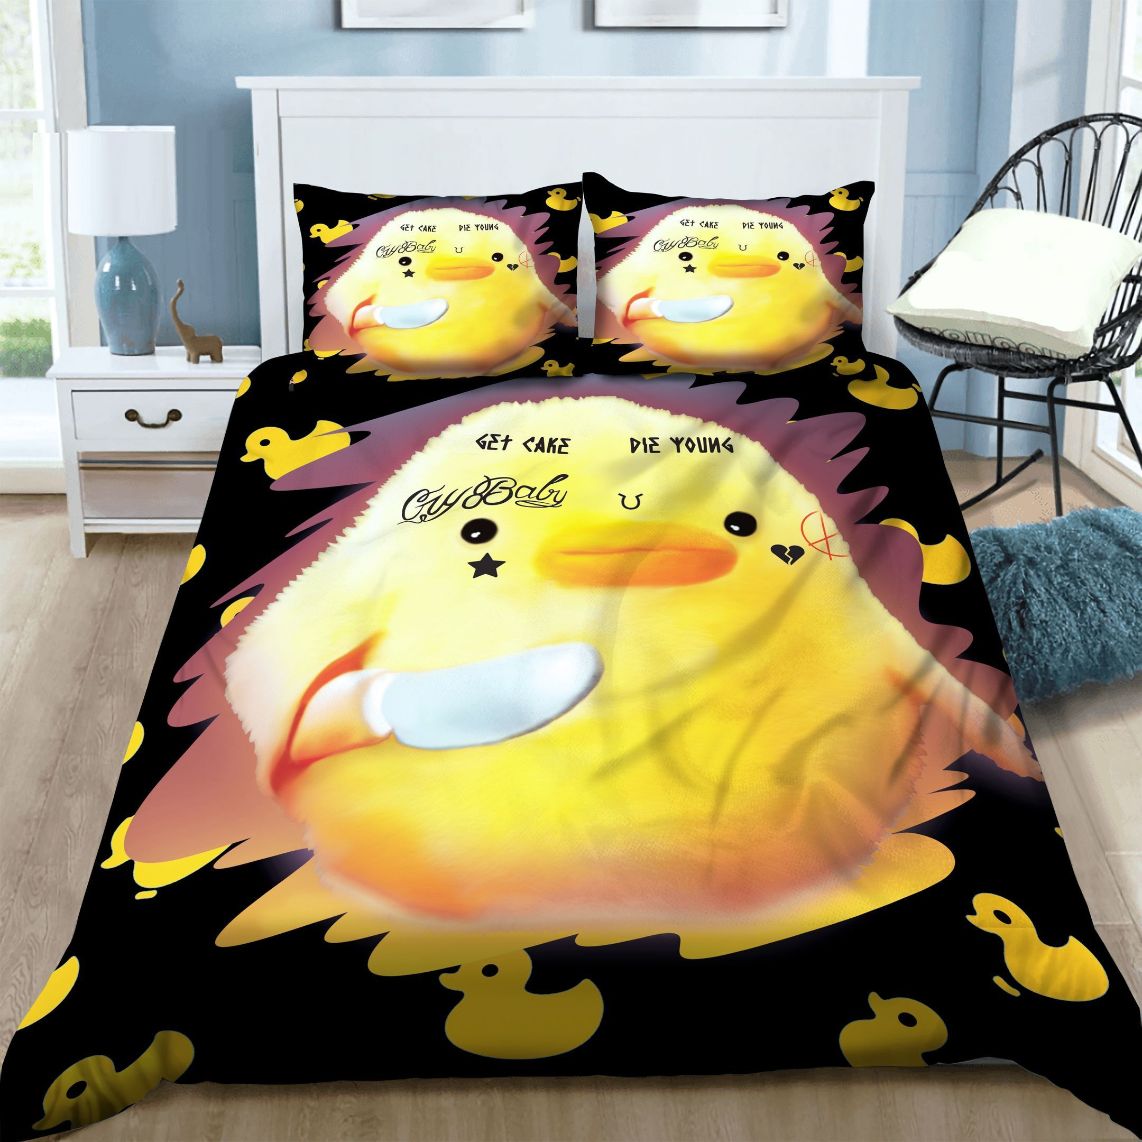 Duck Get Cake Die Young Cry Baby Cotton Bedding Sets Perfect Gifts For Duck Lover Gifts For Birthday Christmas